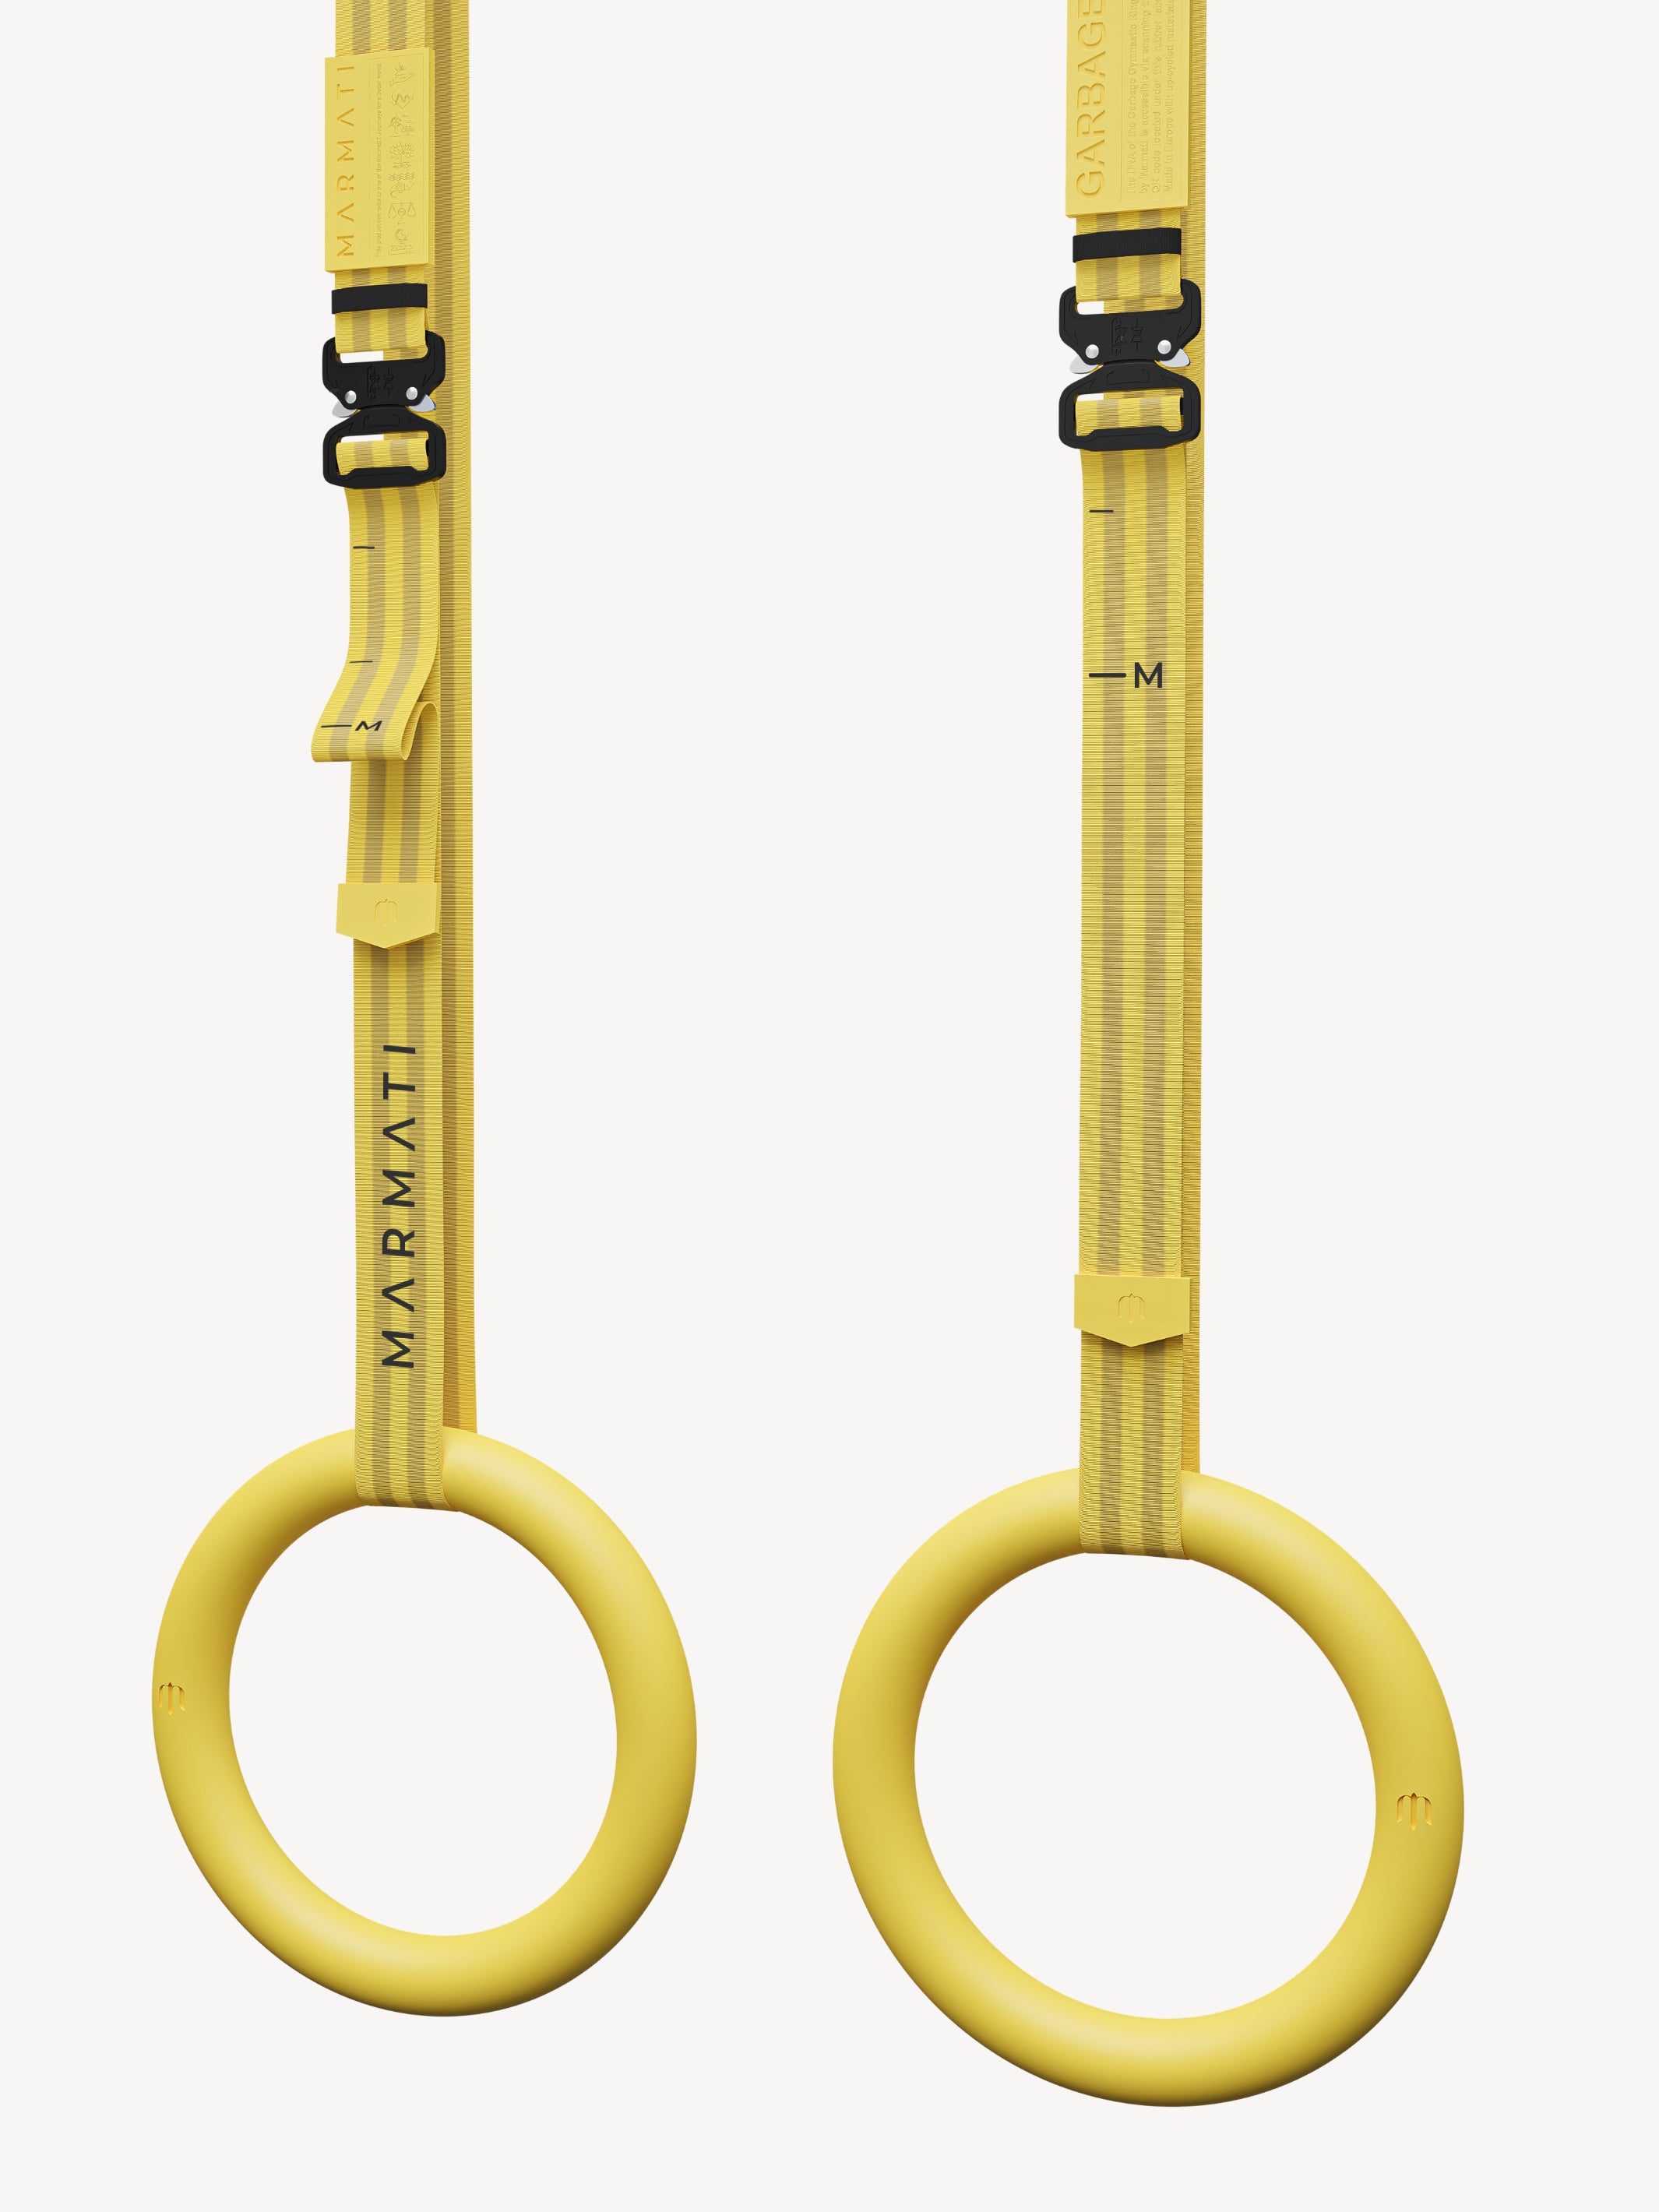 Constructed from recycled materials with high-performance, gymnastic rings by Marmati ensure an adventurous performance that engages the body, mind, and soul. Made for the most demanding workouts off the ground. Journey 3 edition is helping to generate clean energy in collaboration with Renewable World via Work for Good.